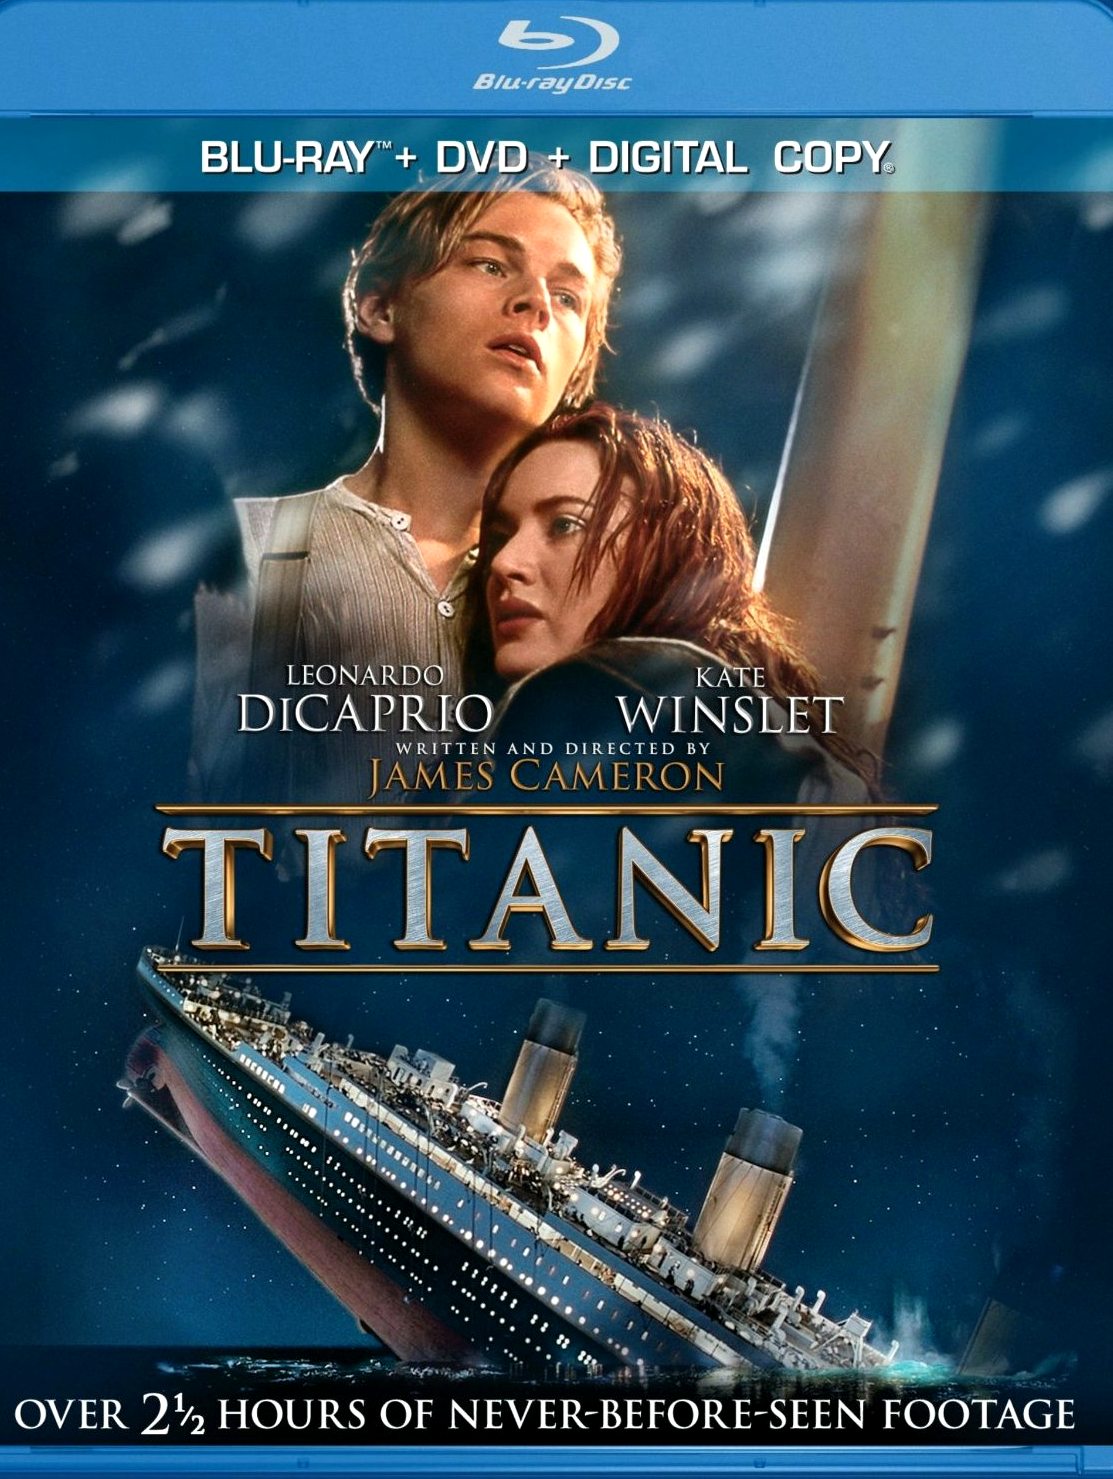 Widescreen Titanic (1997 film) VHS Tapes for sale